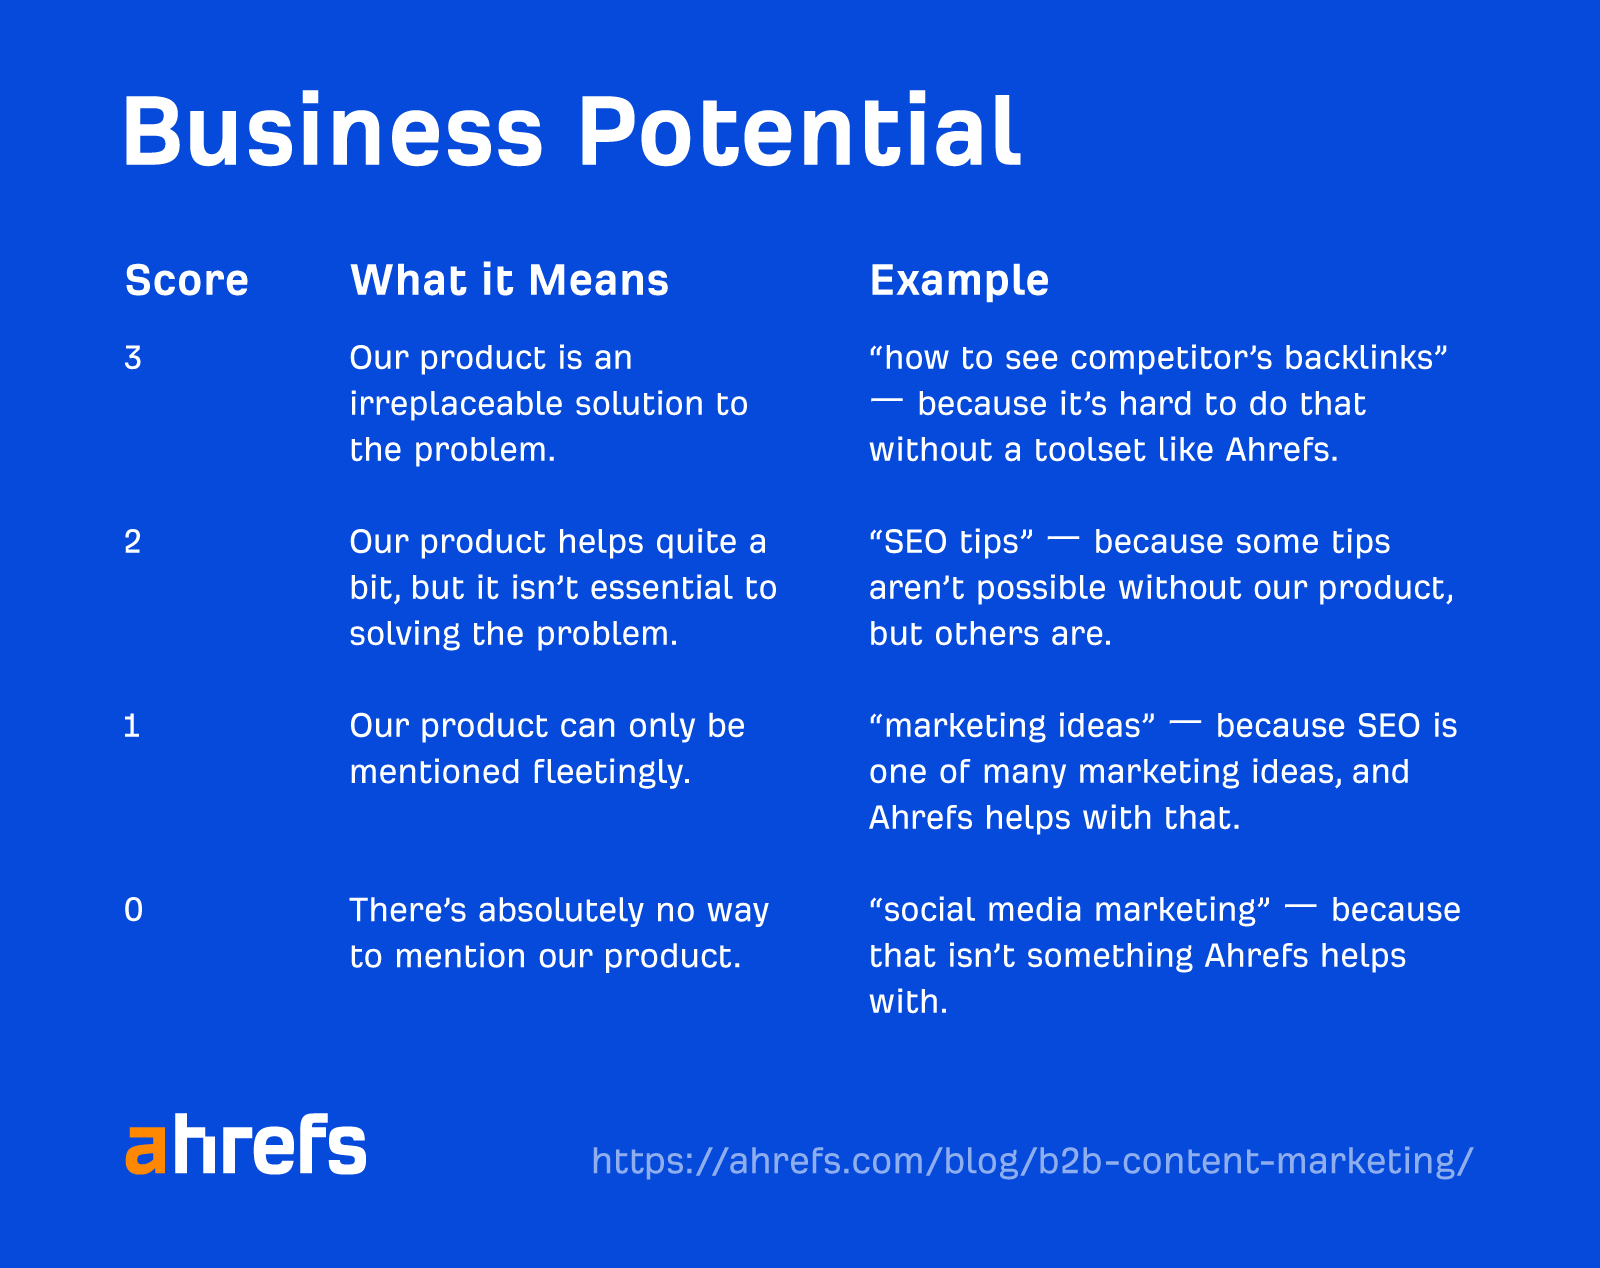 How we determine Business Potential scores